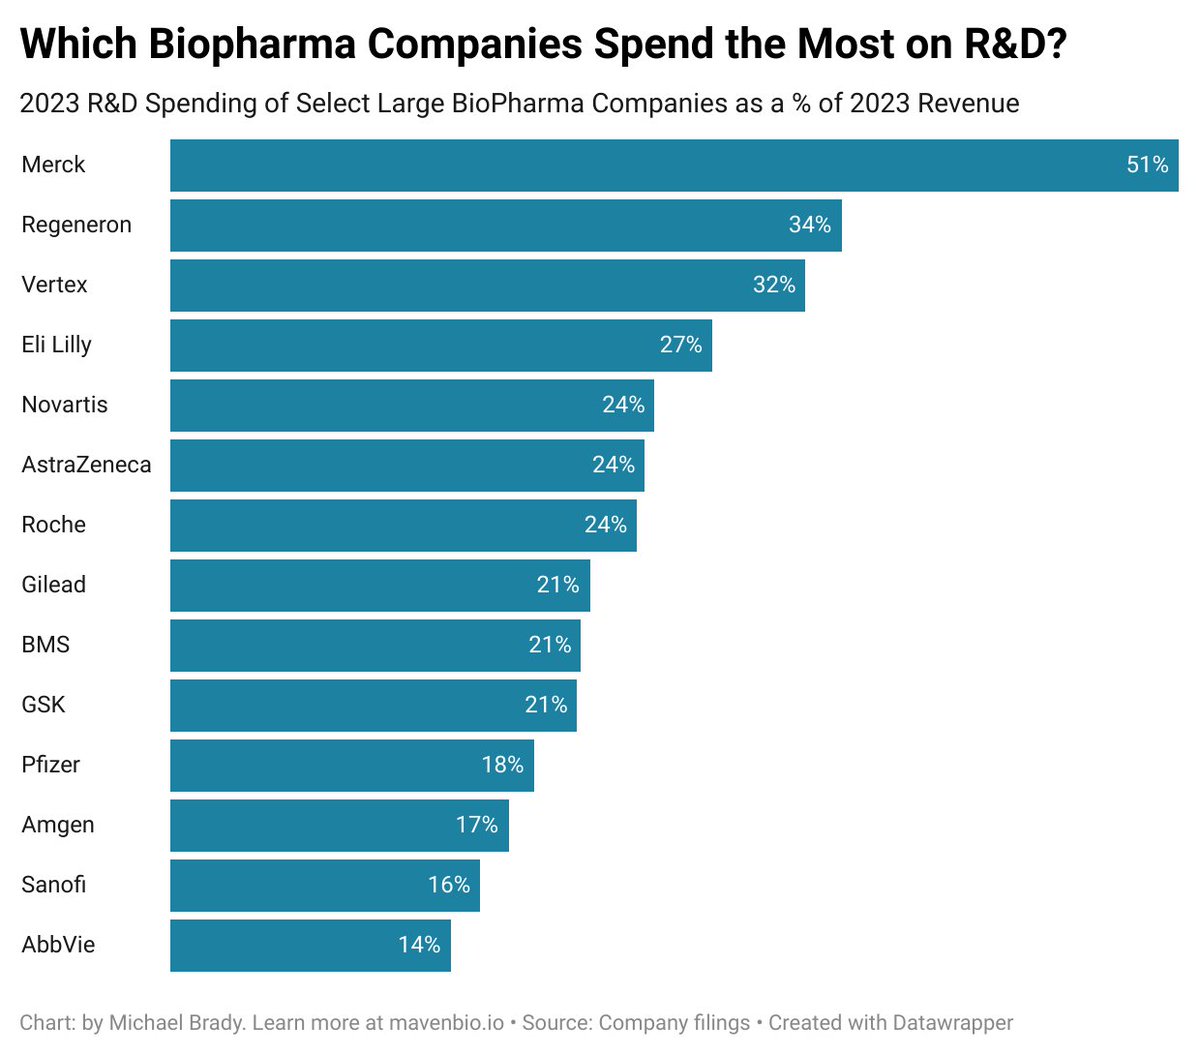 Worth remembering that BioPharma spends a very large percentage of revenue on R&D. Can't just look at cost of goods sold when thinking about industry margins.